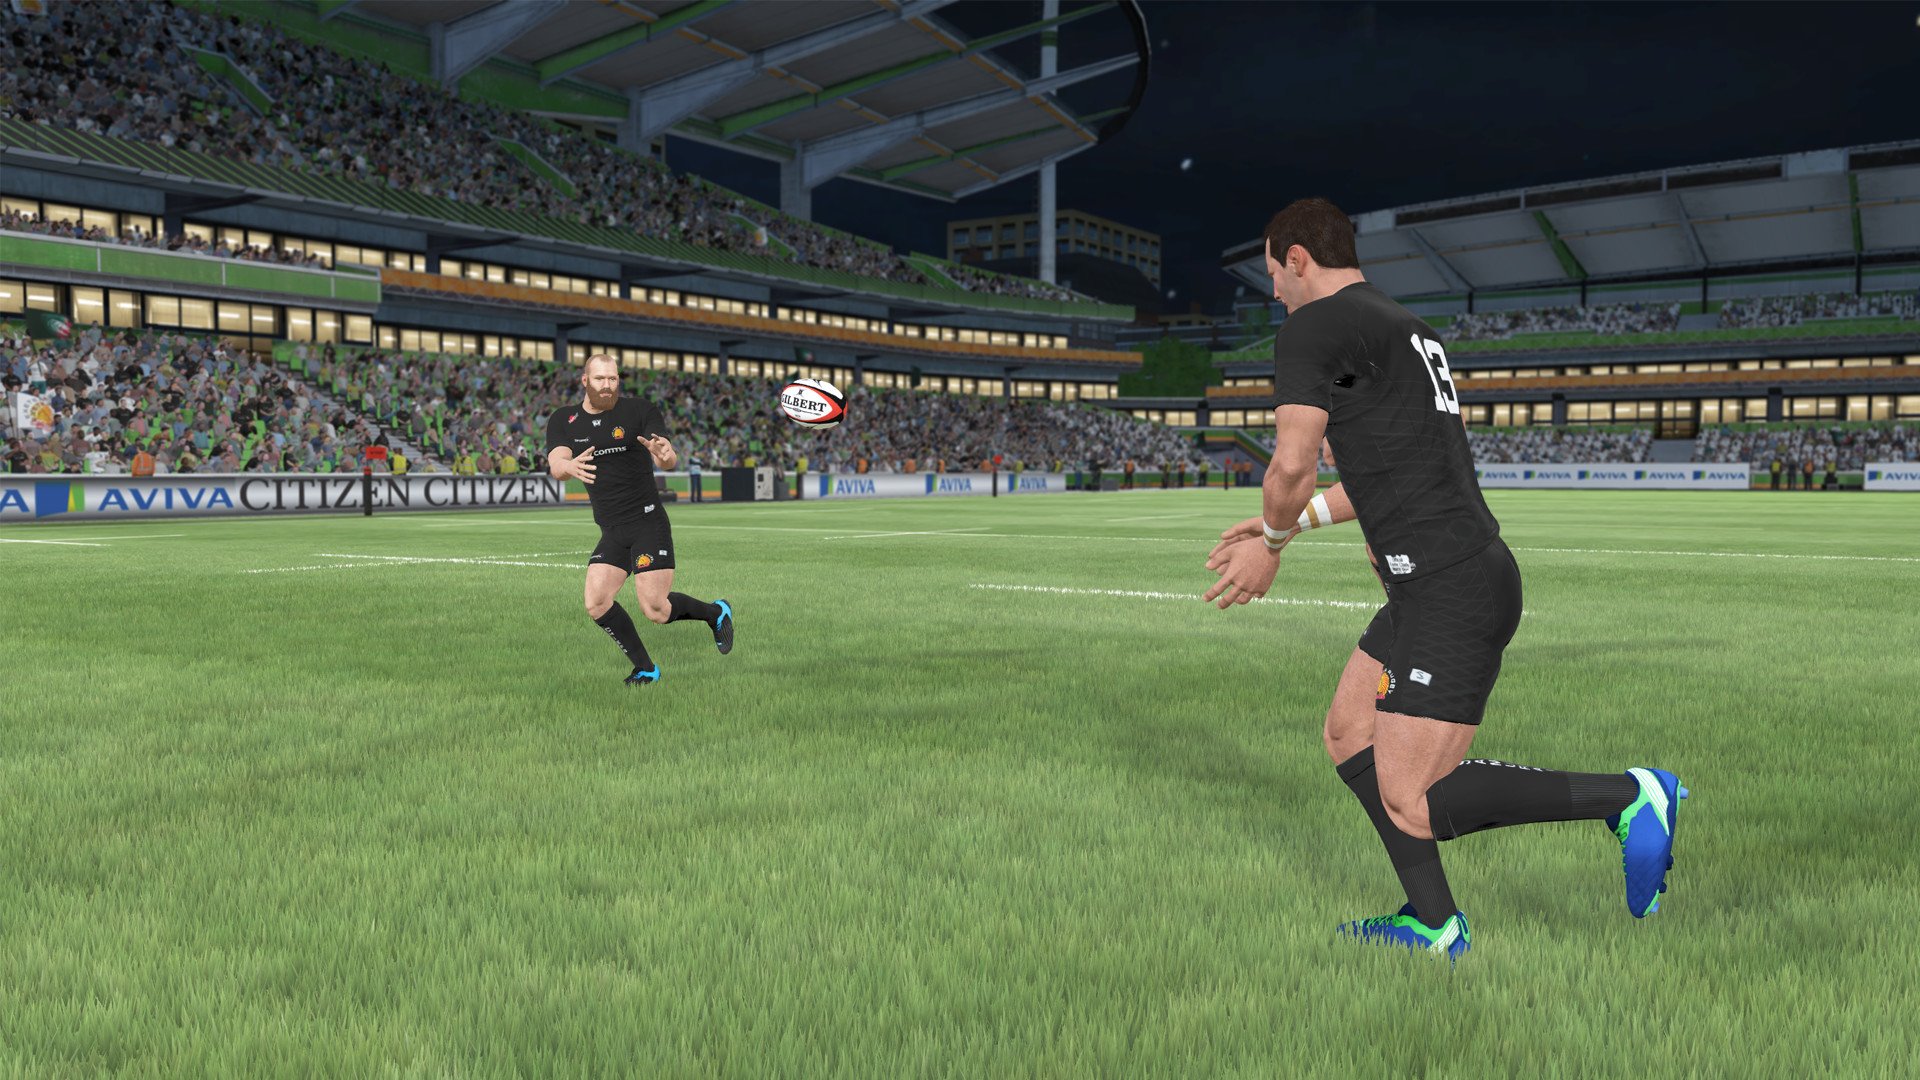 rugby 10 pc game